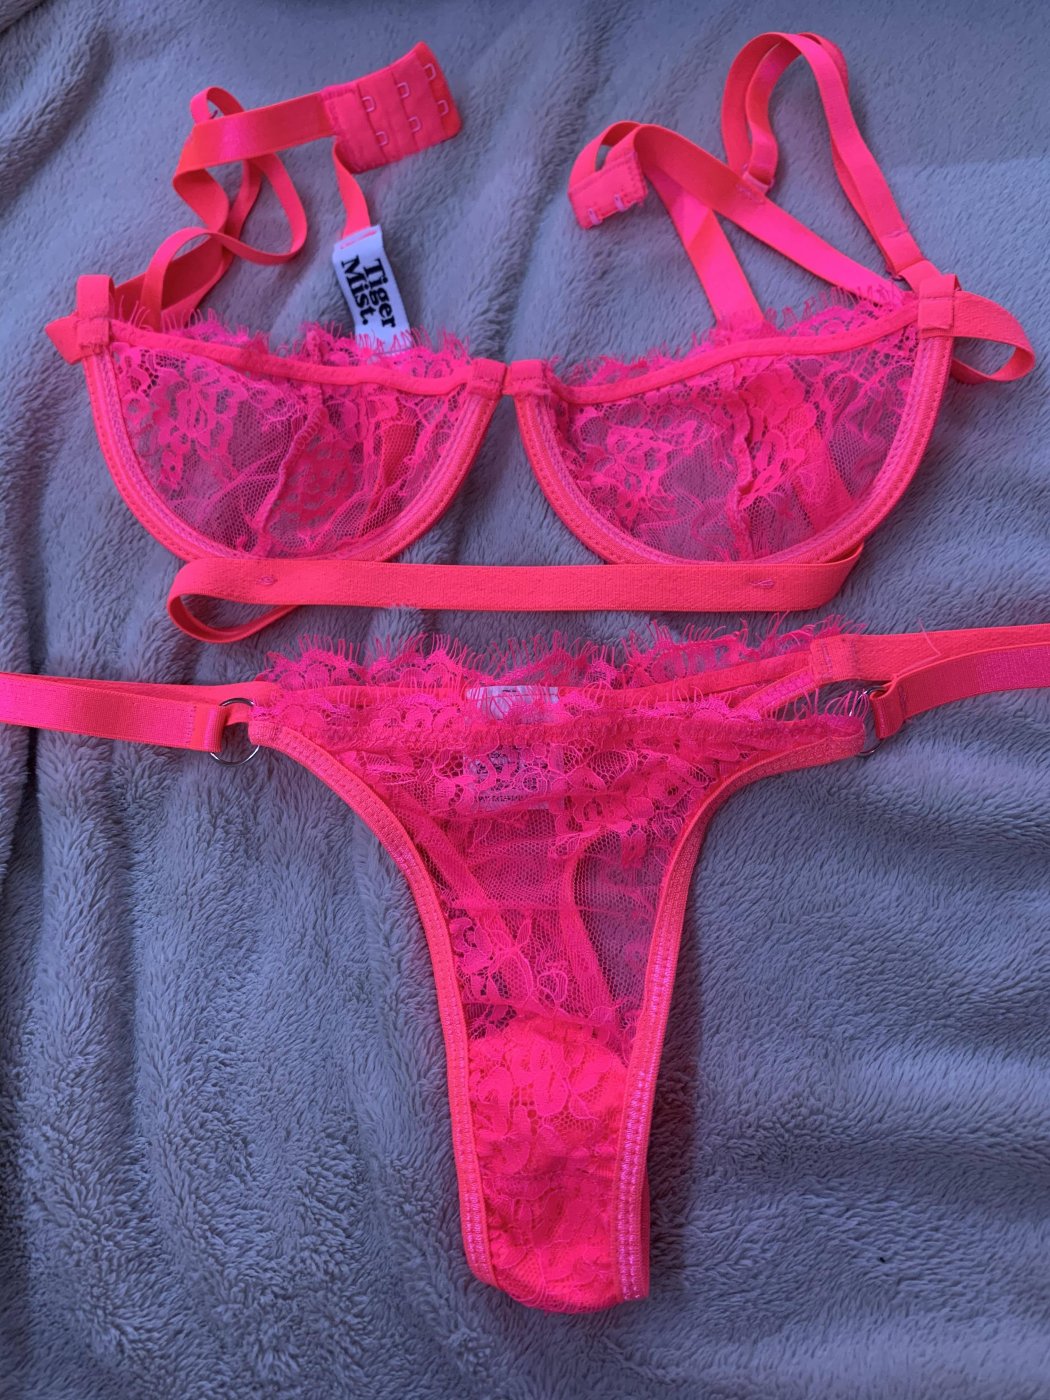 HOT pink lacey lingerie bra